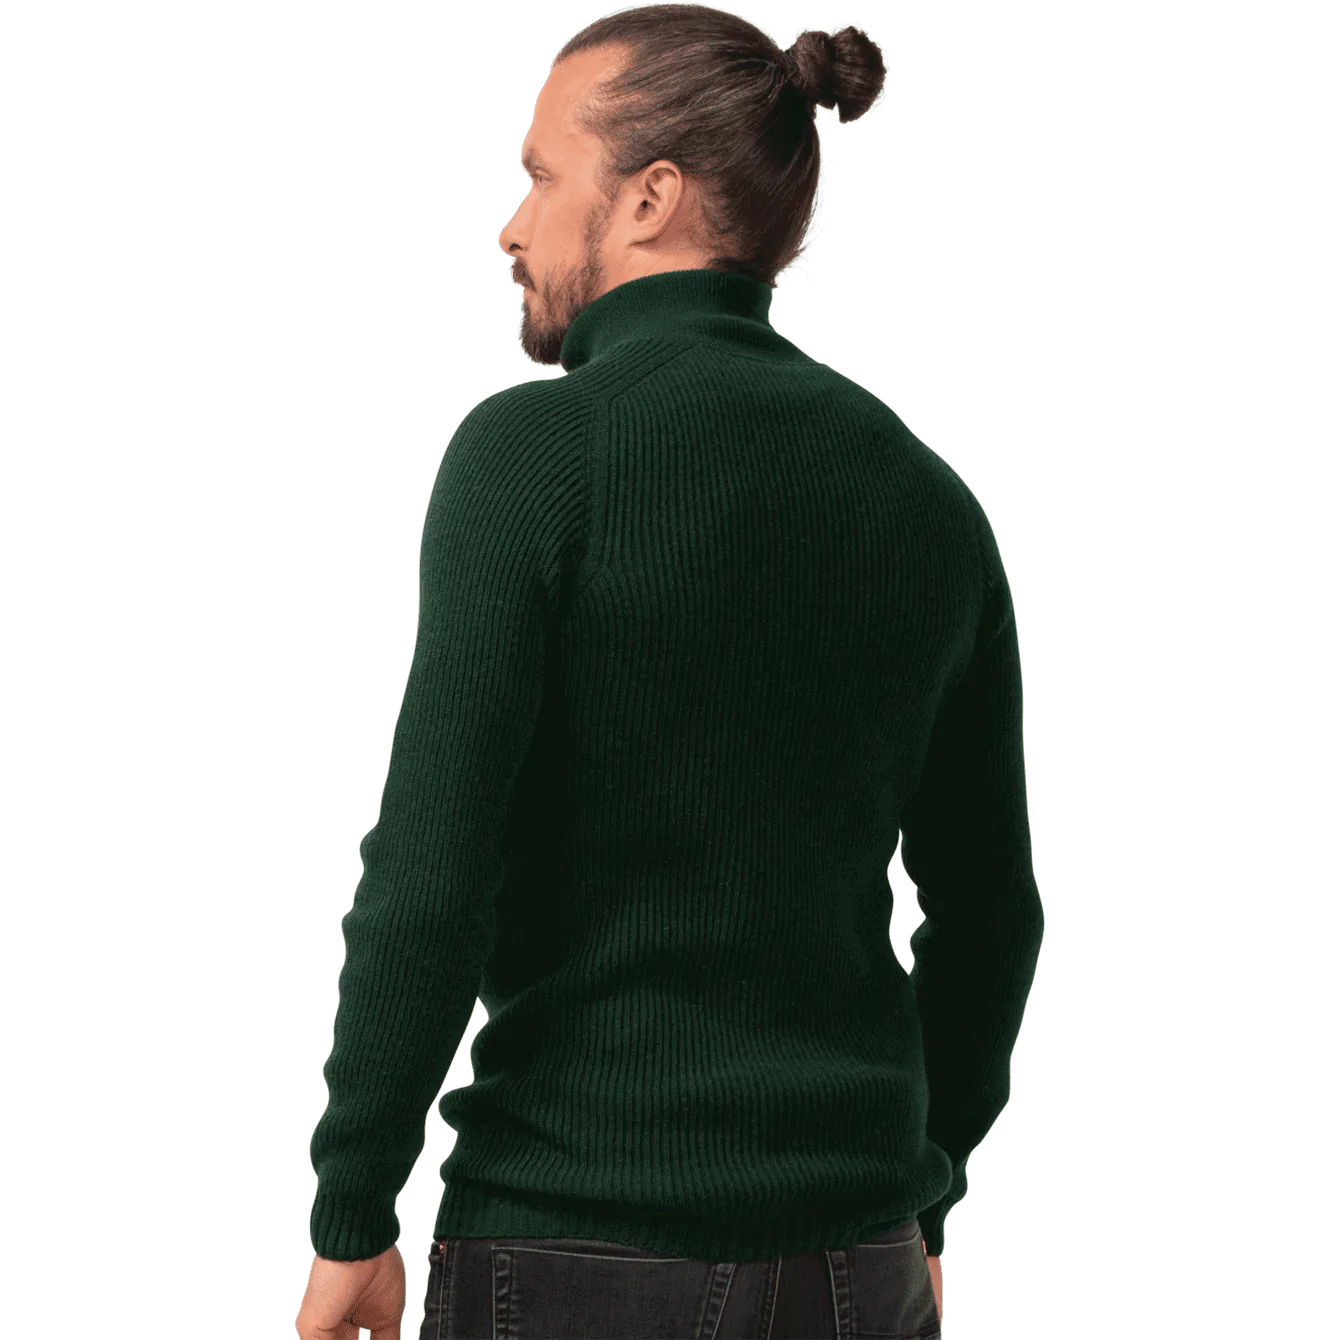 north-outdoor-madeinfinland-metso-m-pullover-forest-green-pose-2-back-fw19-n11703v01_1800x1800